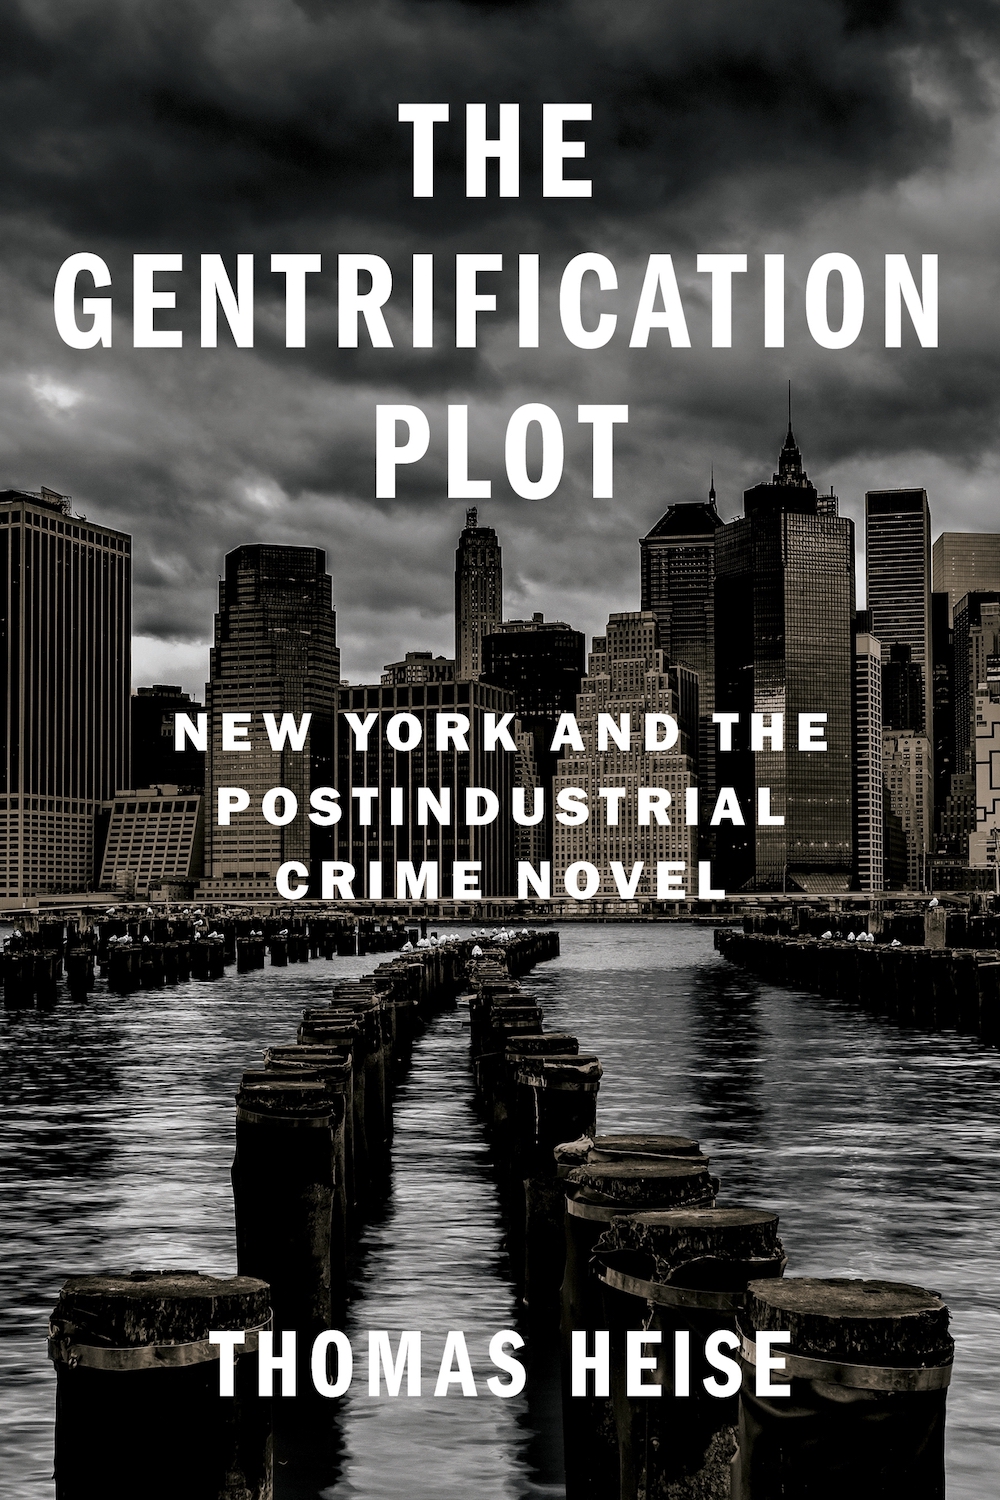 The cover of The Gentrification Plot: New York and the Postindustrial Crime Novel